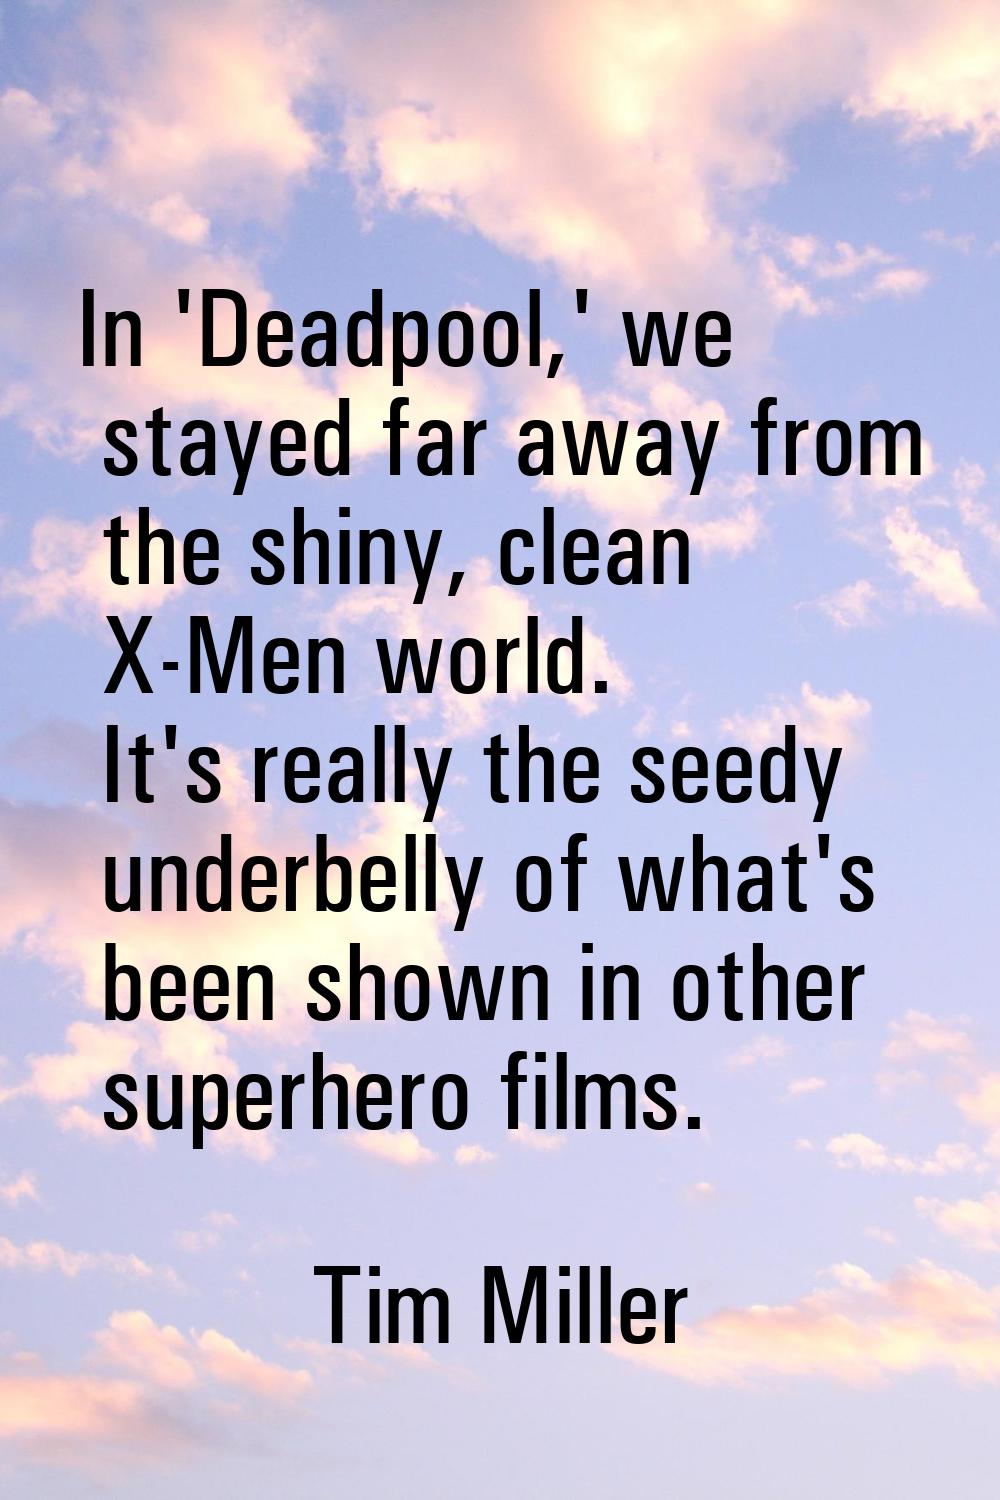 In 'Deadpool,' we stayed far away from the shiny, clean X-Men world. It's really the seedy underbel